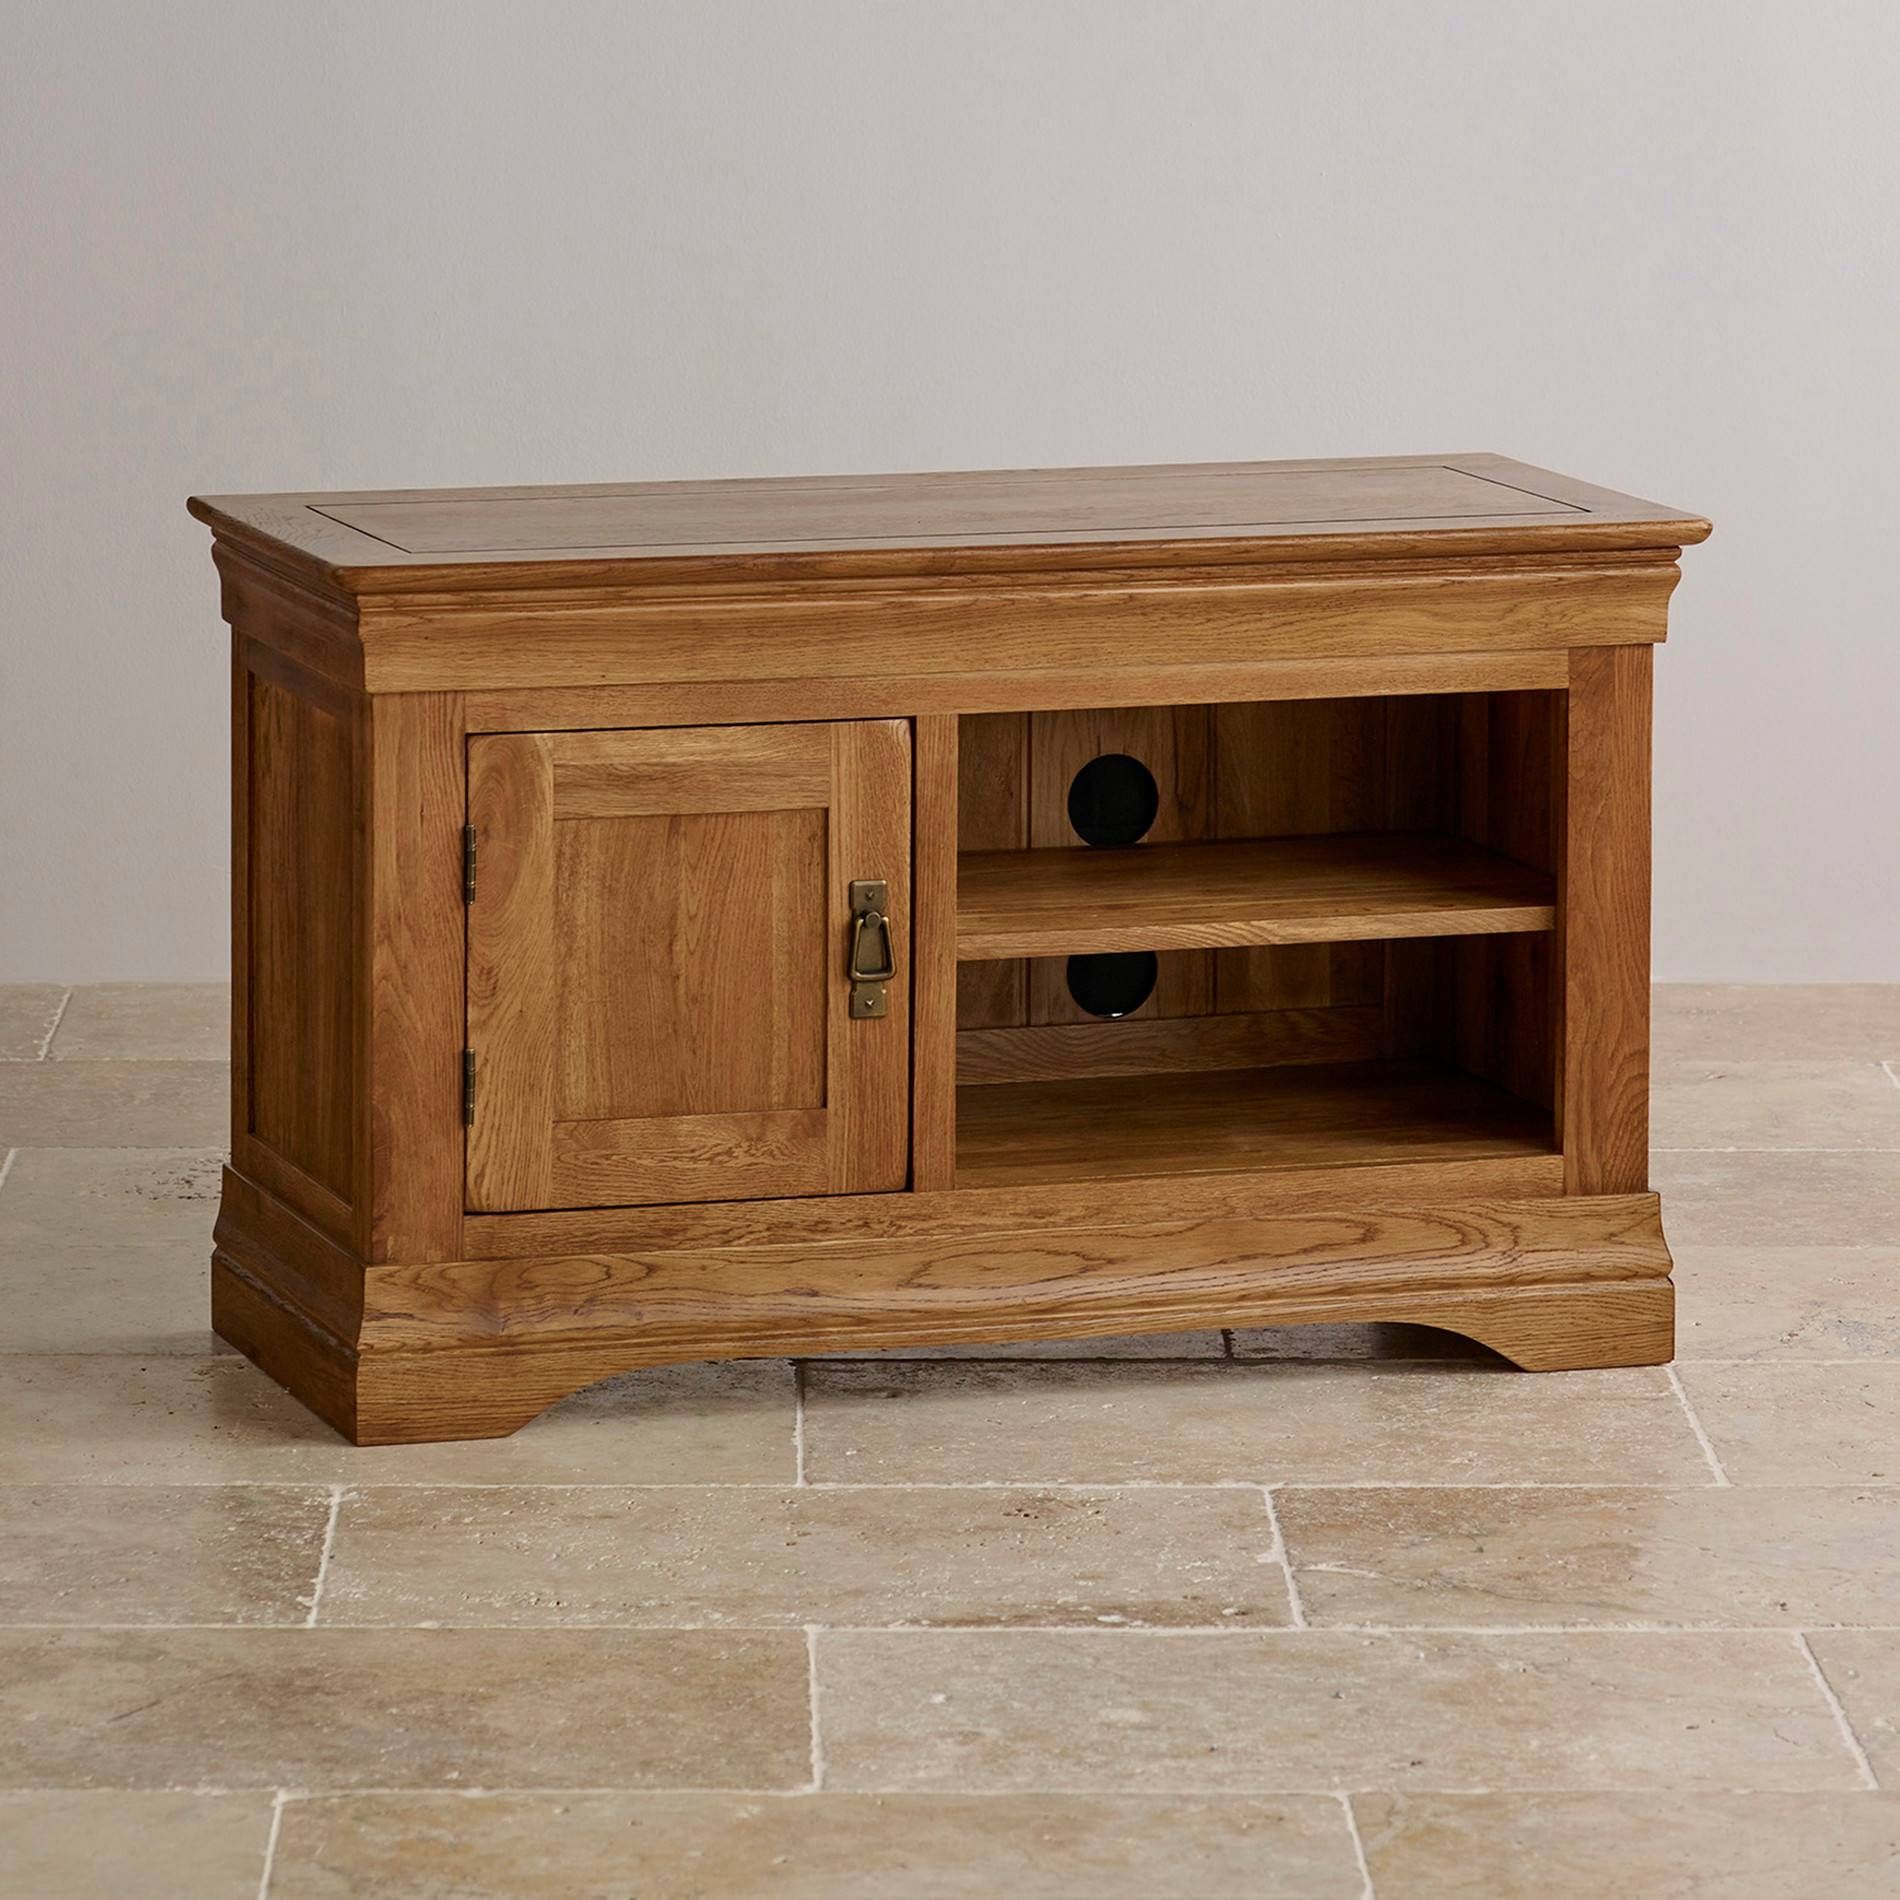 French Farmhouse Tv Cabinet | Solid Oak | Oak Furniture Land Throughout Small Tv Cabinets (View 1 of 15)